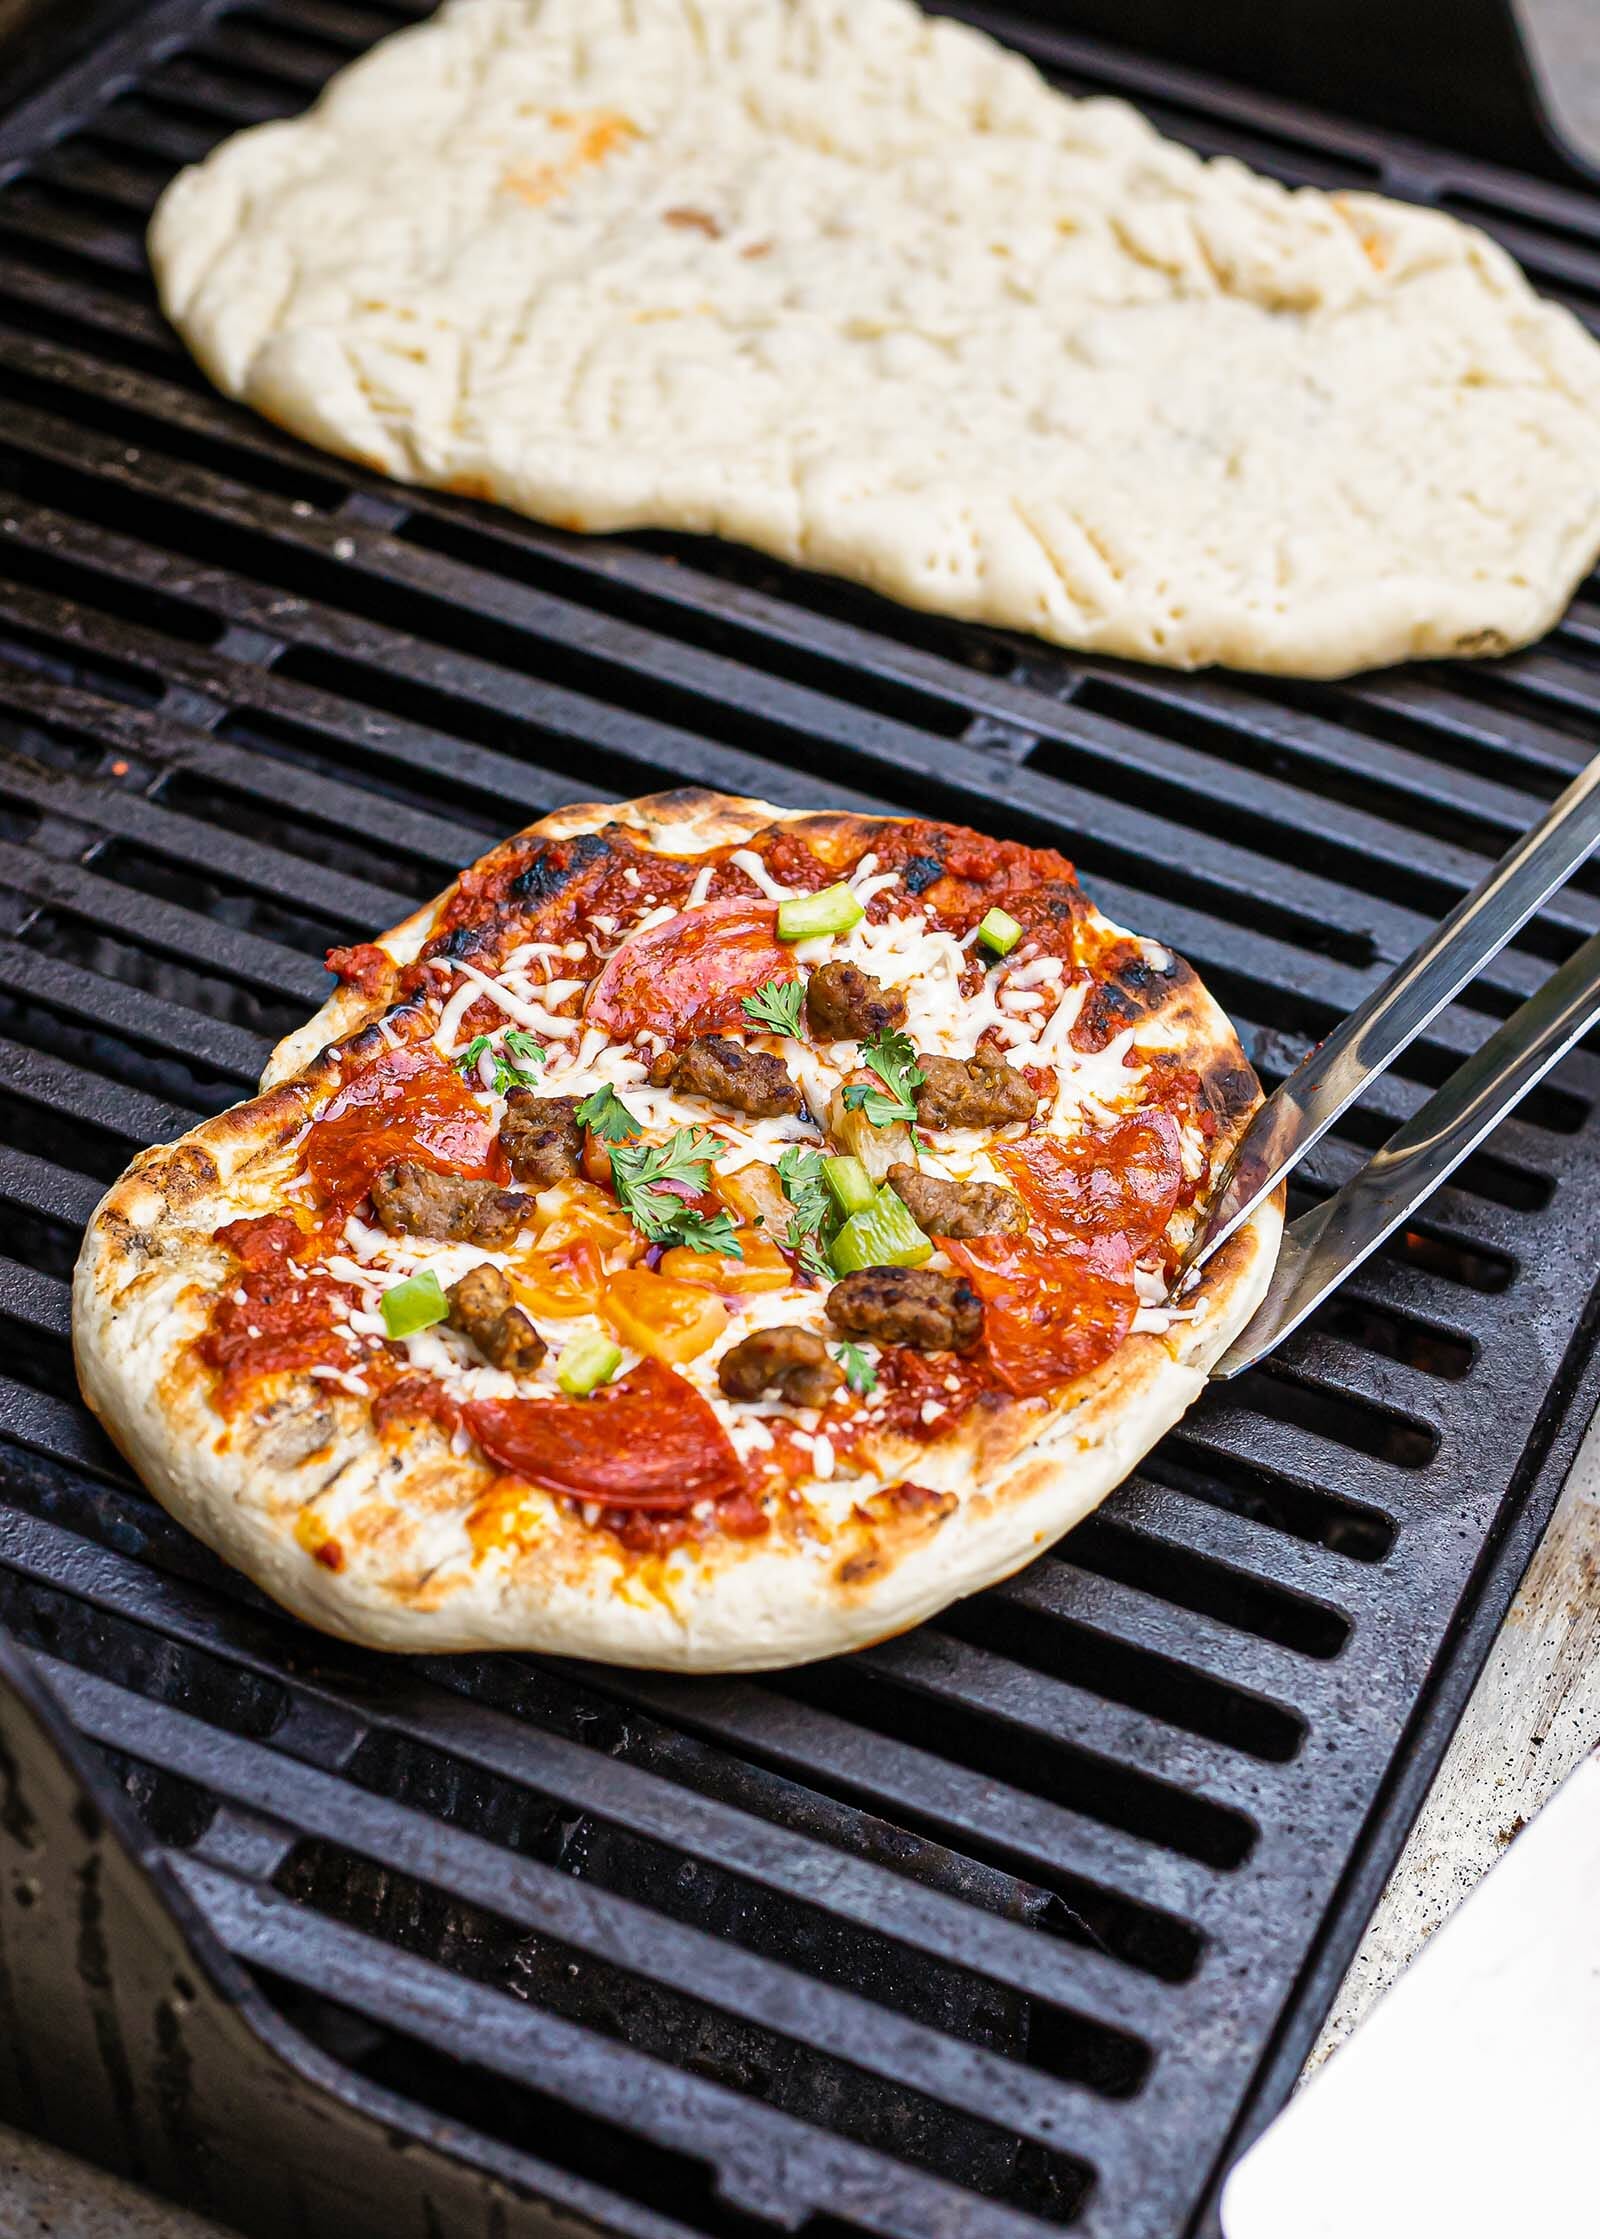 A pizza is on the grill and loaded with toppings and tongs hold it. A rectangular piece of dough is on the other side of the grill to show how to make pizza on the grill.